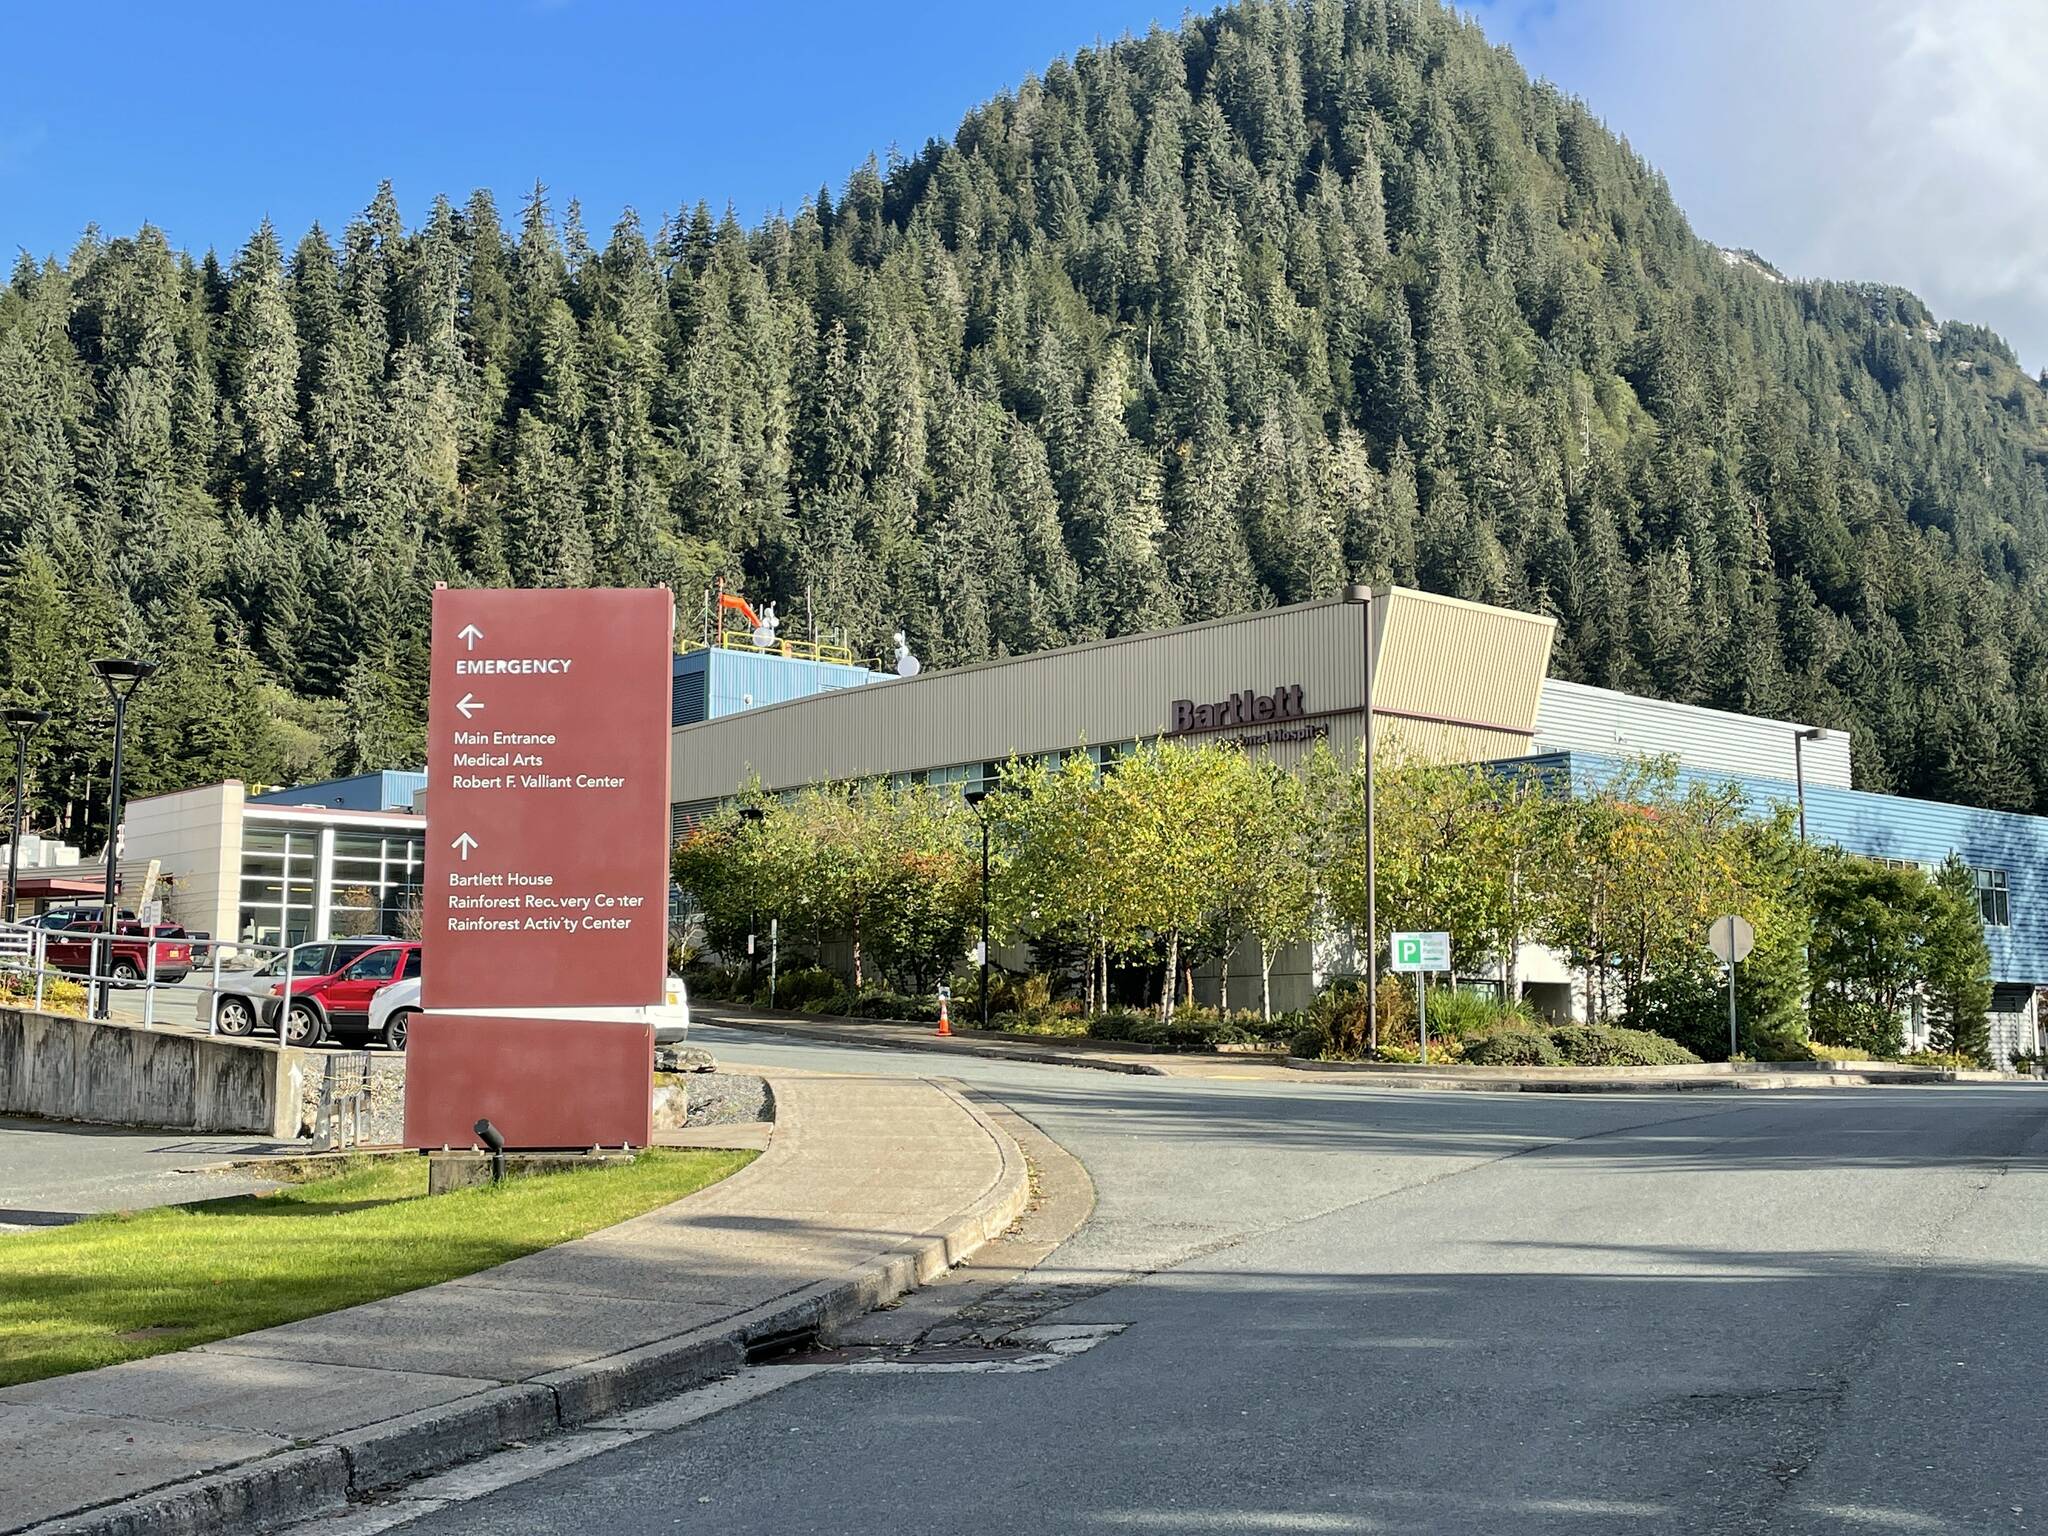 Bartlett Regional Hospital is extending its search for a new chief executive officer after two finalists for the job recently withdrew from consideration. (Michael S. Lockett / Juneau Empire File)